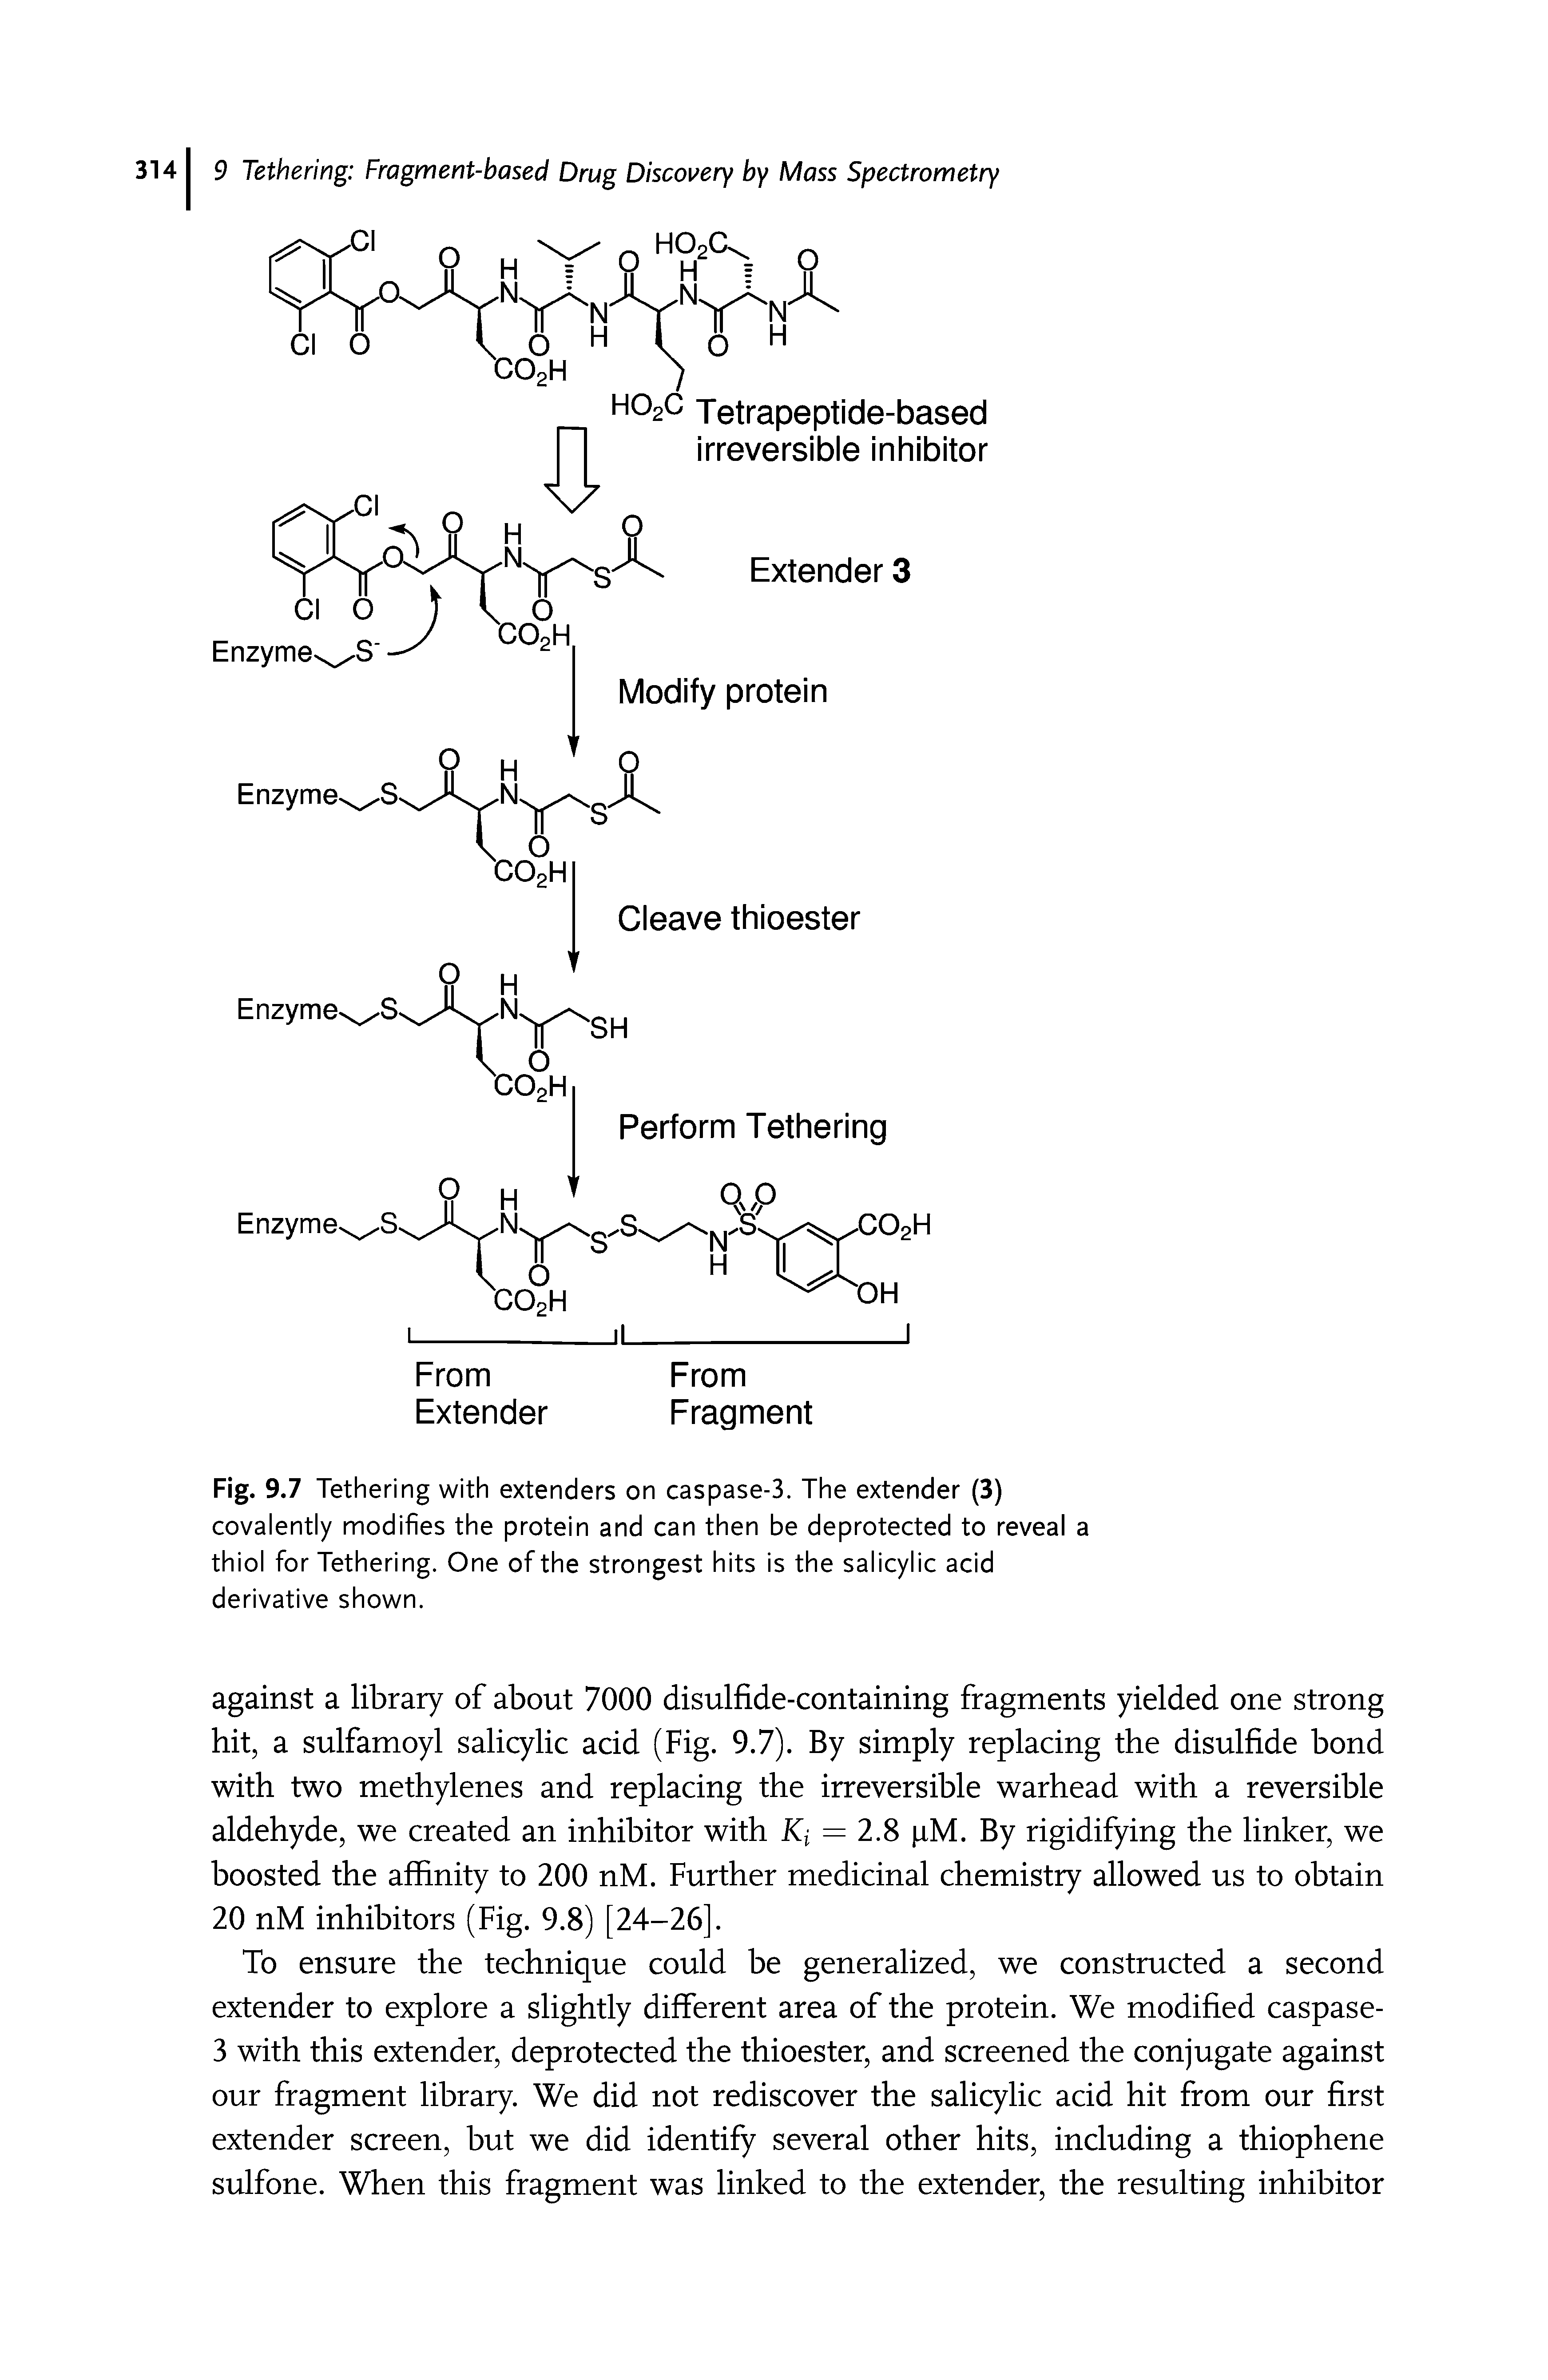 Fig. 9.7 Tethering with extenders on caspase-3. The extender (3) covalently modifies the protein and can then be deprotected to reveal a thiol for Tethering. One of the strongest hits is the salicylic acid derivative shown.